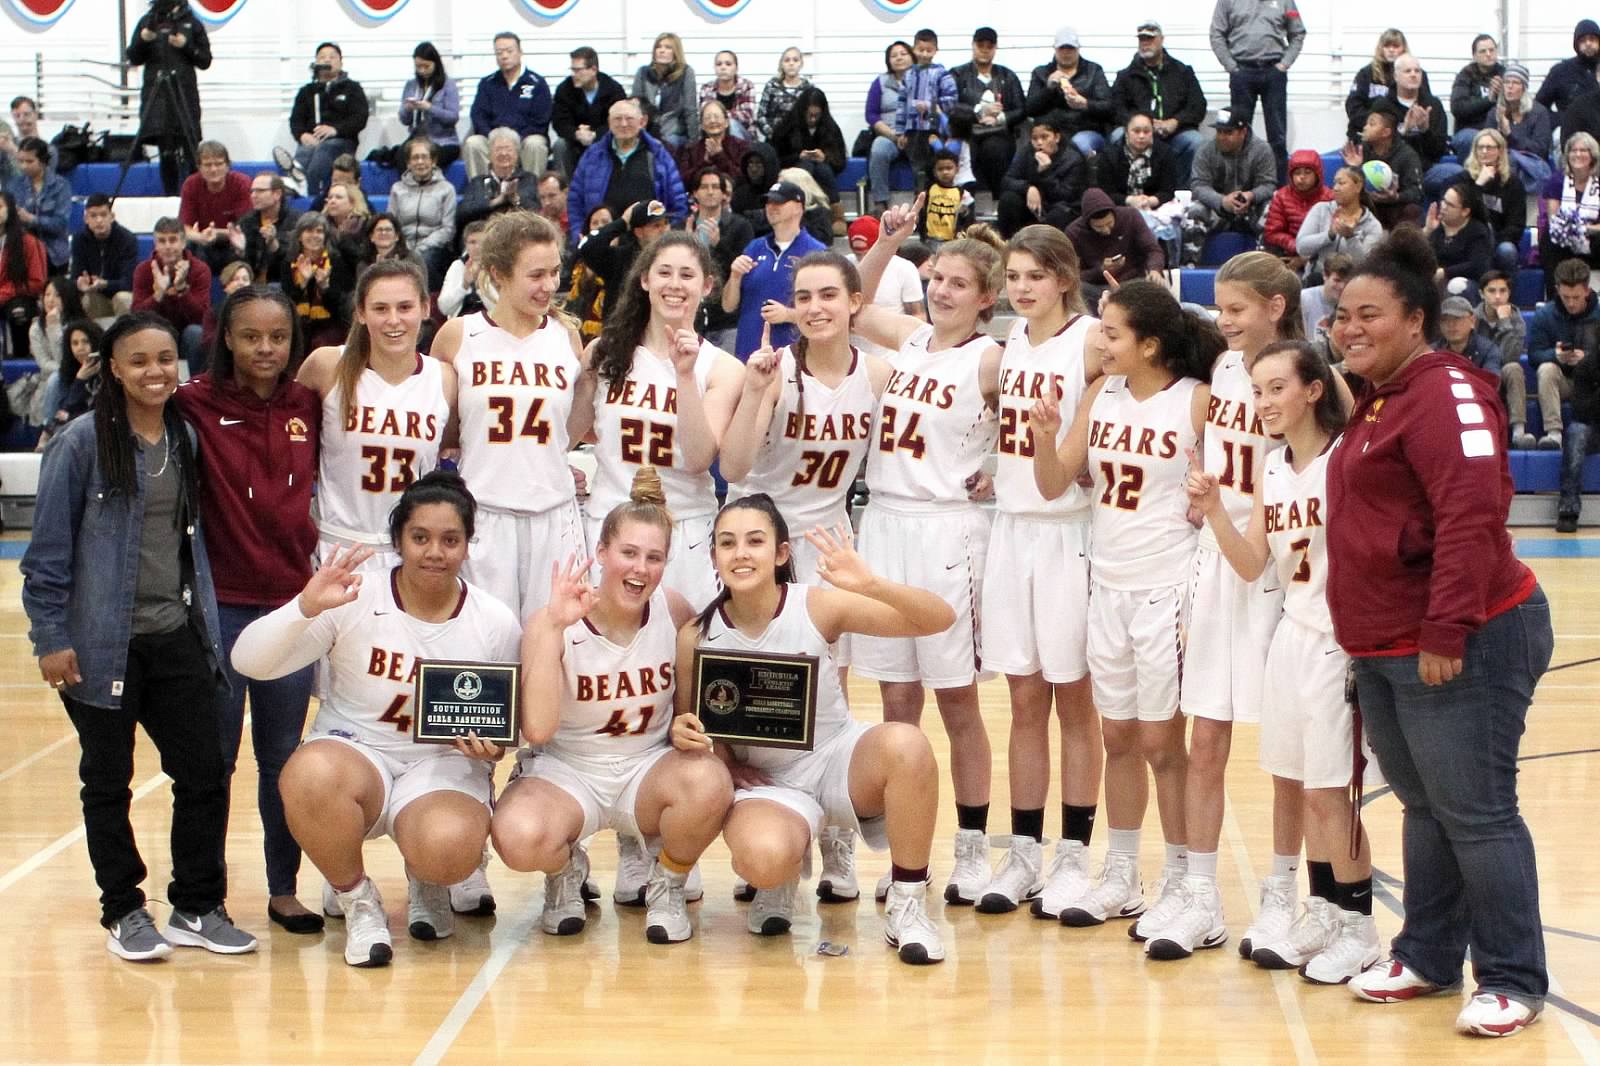 Girls Basketball ends the year with another successful season